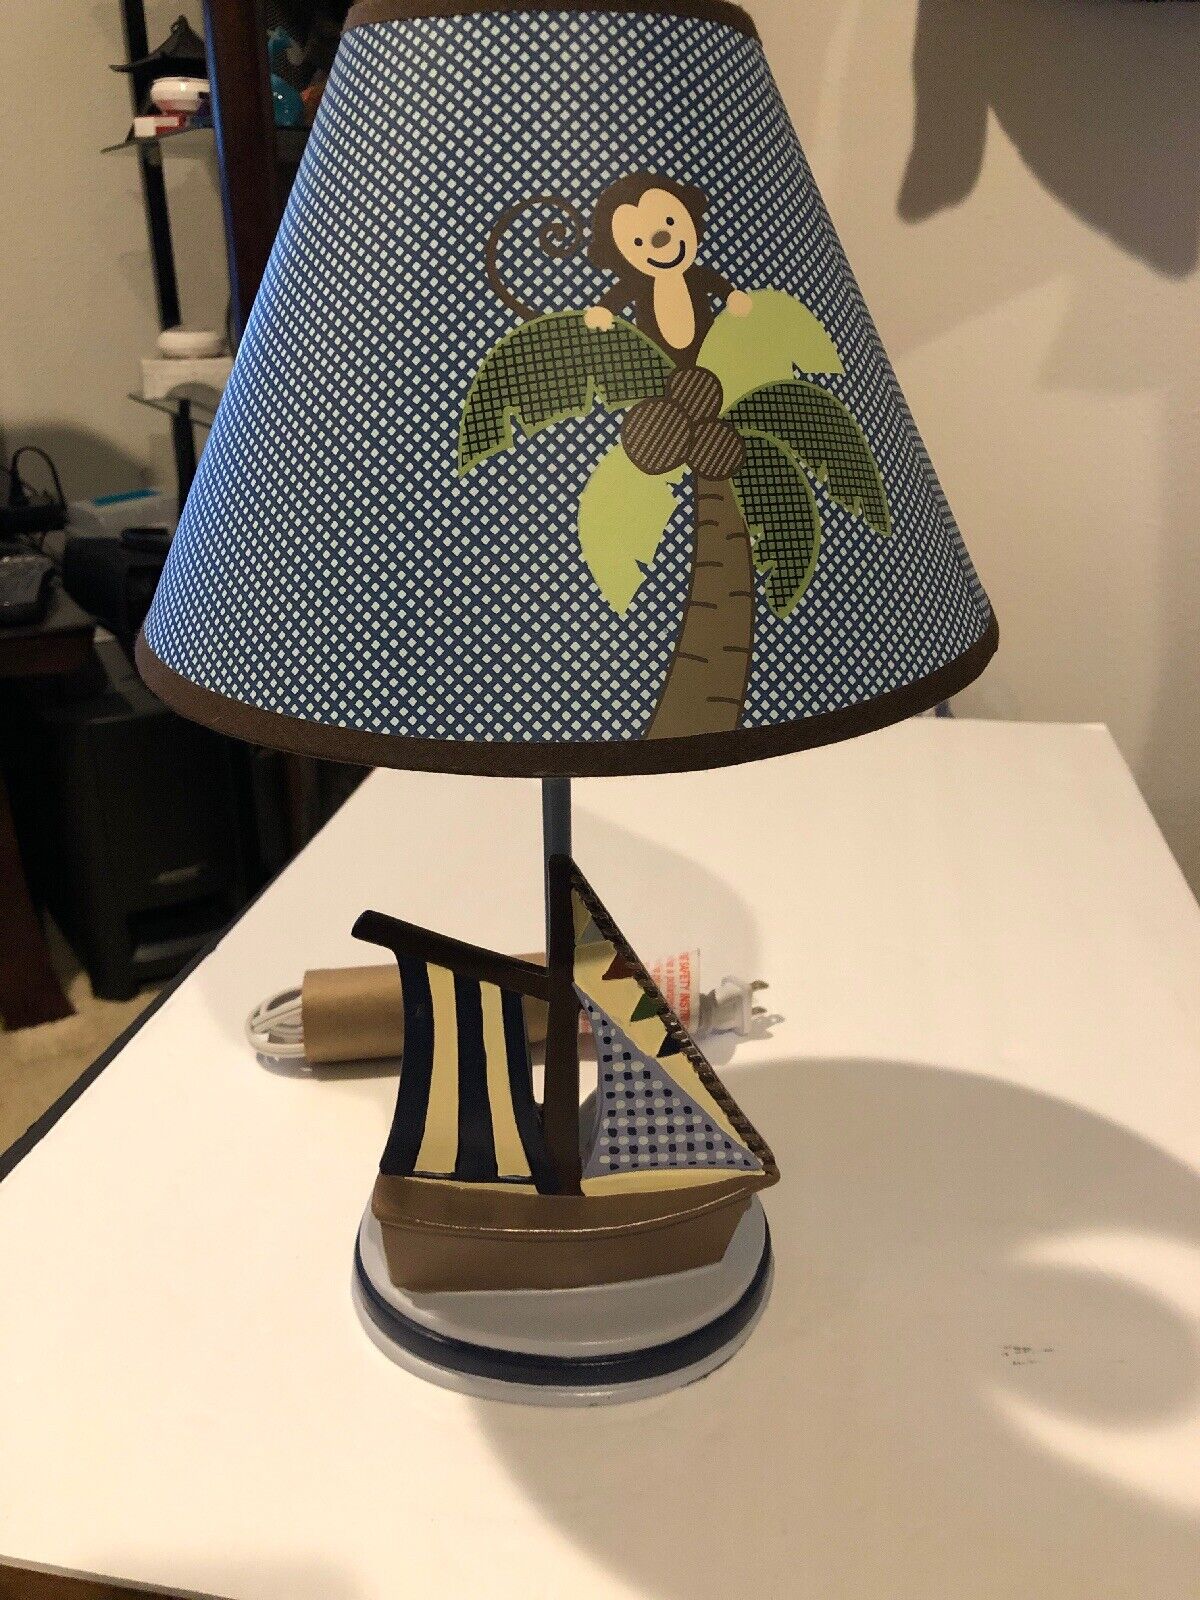 NoJo Ahoy Sale price Mate Minneapolis Mall Lamp and Sailboat Monkey Shade